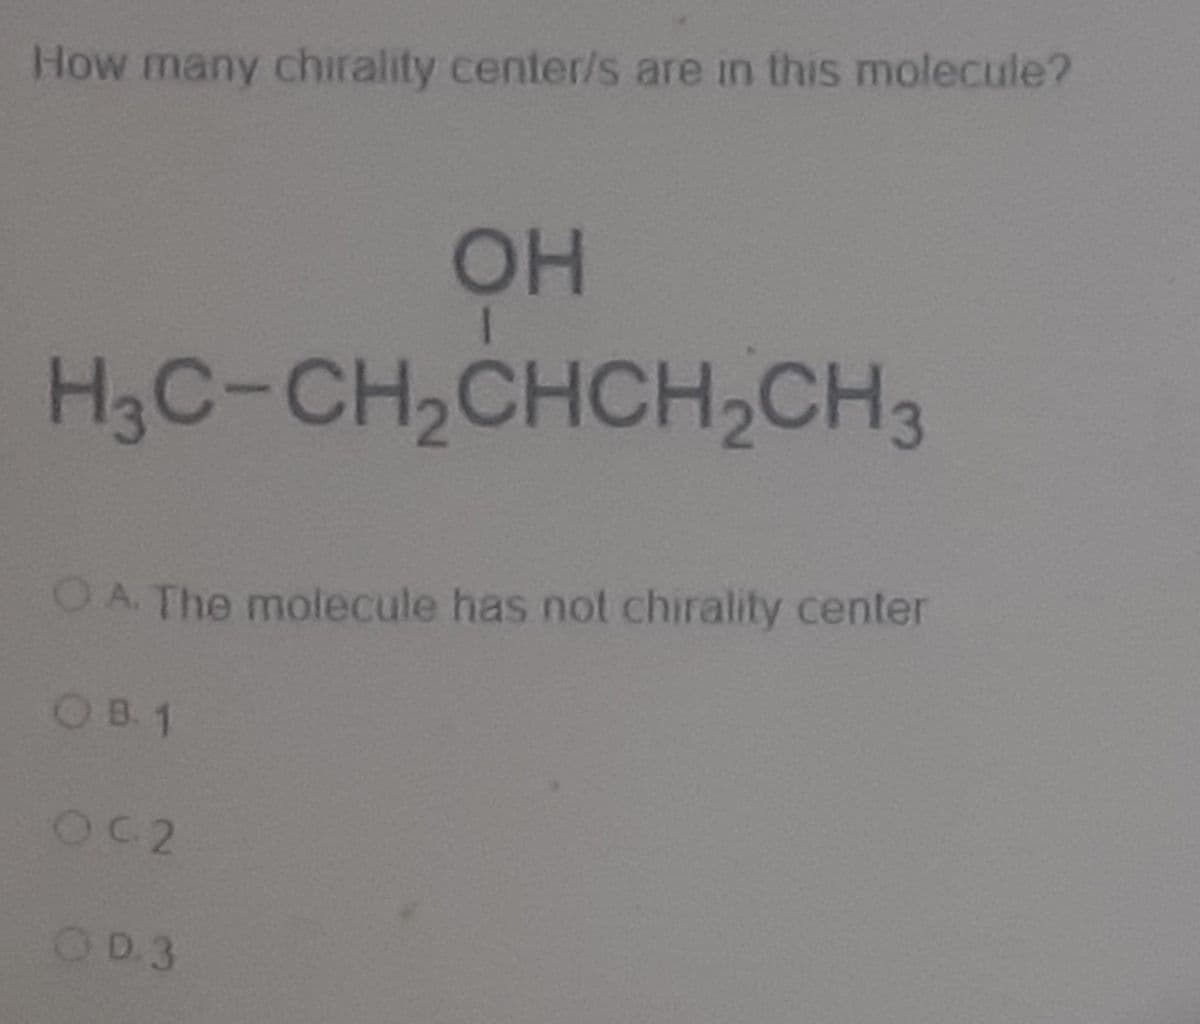 How many chirality center/s are in this molecule?
OH
H3C-CH,CHCH,CH3
OA. The molecule has not chirality center
OB 1
OC2
OD 3
